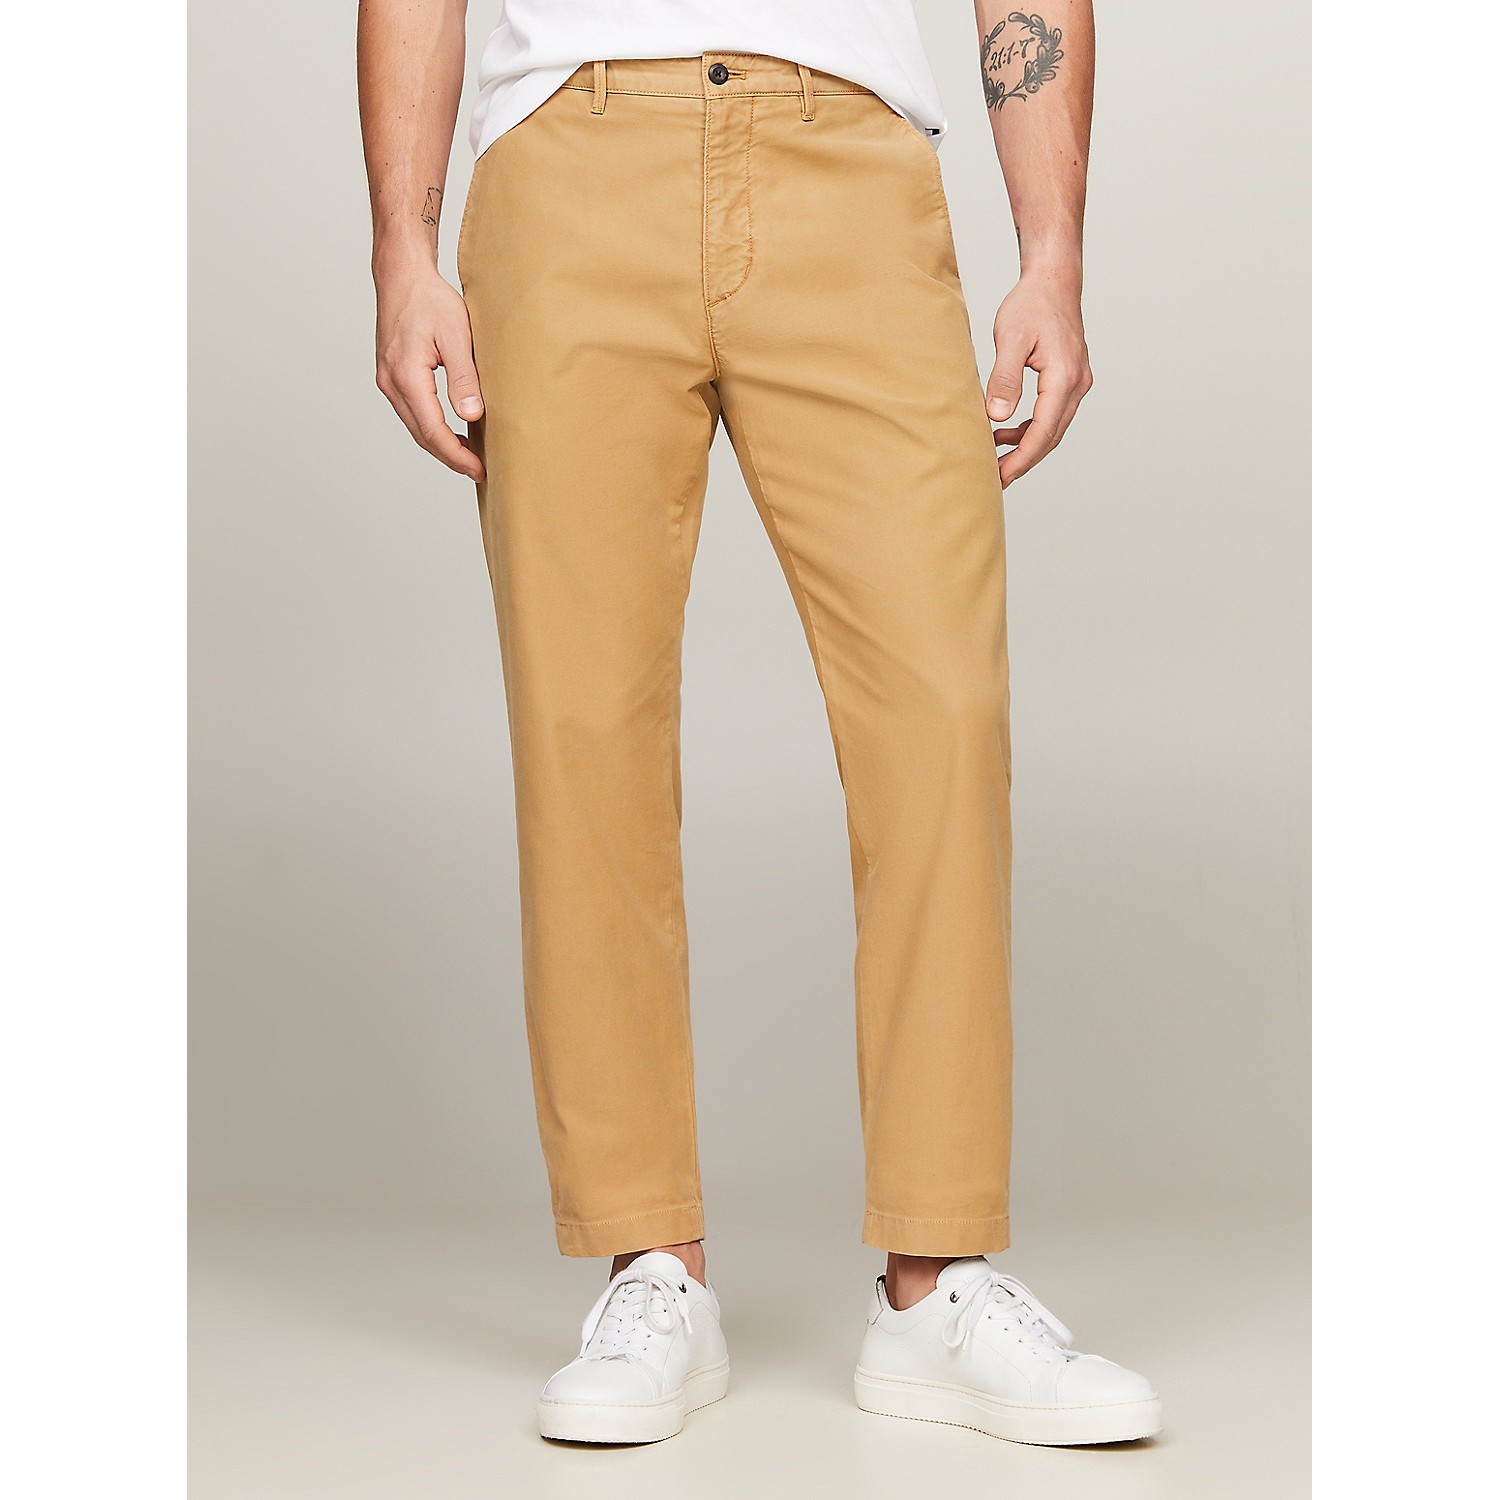 TOMMY HILFIGER Harlem Relaxed Tapered Fit Chino